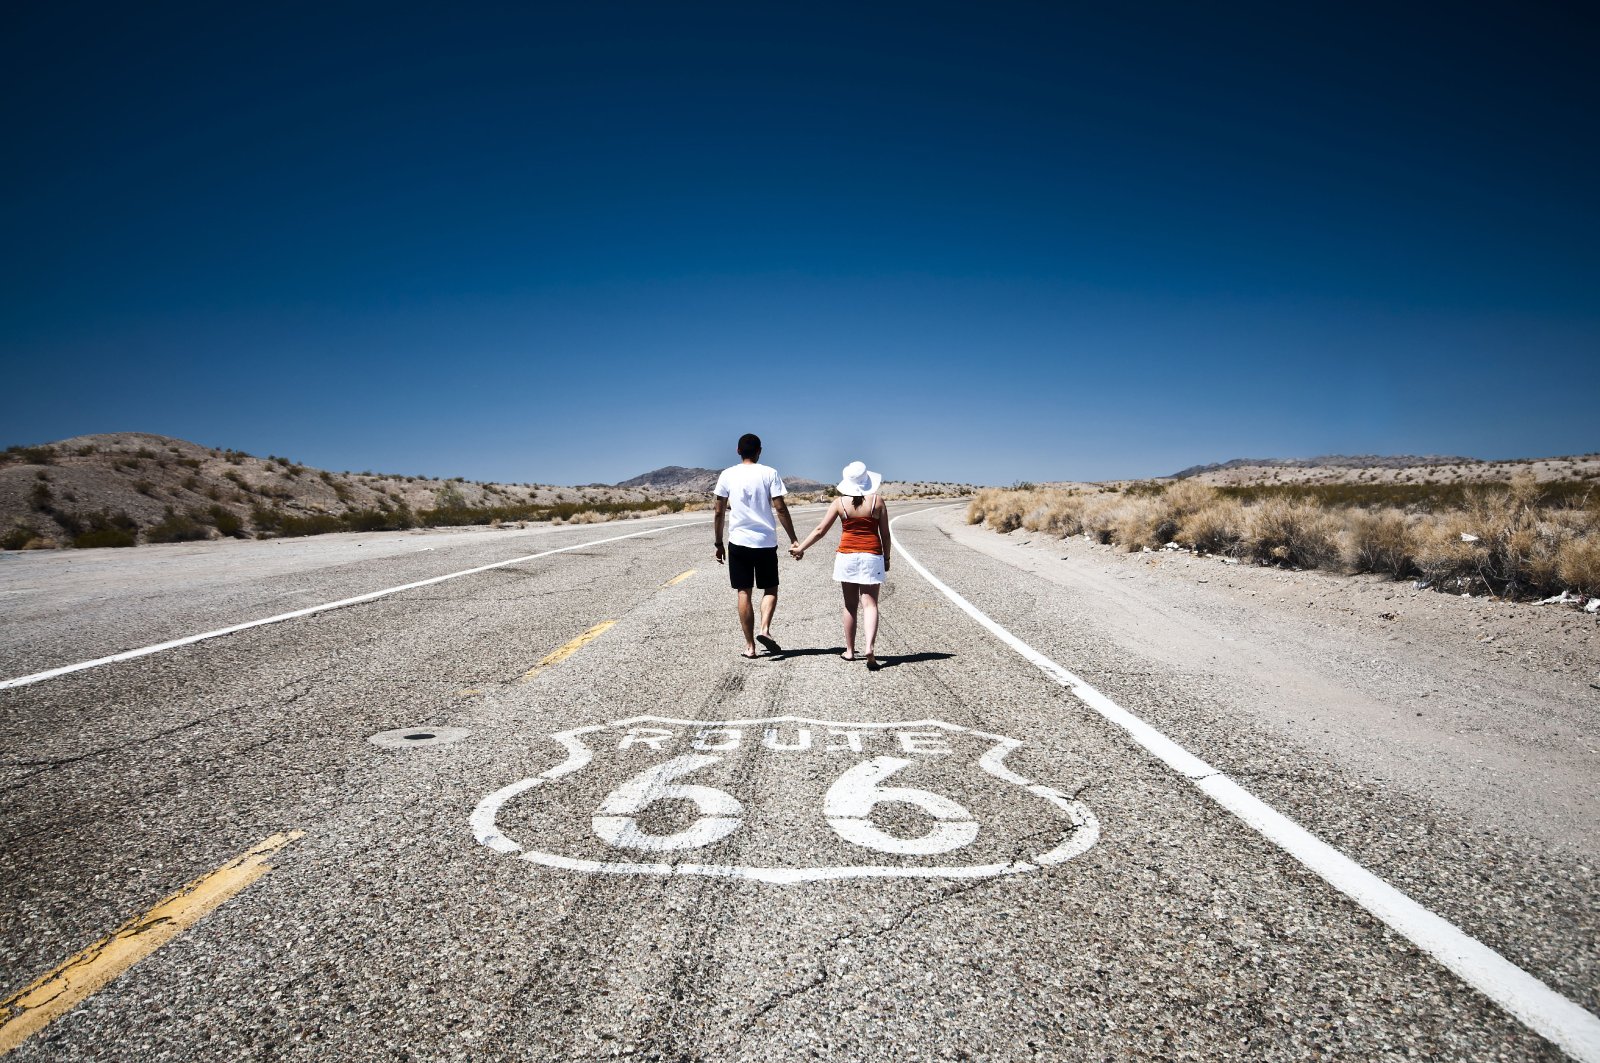 <p class="wp-caption-text">Image Credit: Shutterstock / donvictorio</p>  <p><span>Traverse the heart of America on the legendary Route 66, stretching from Chicago to Santa Monica. It’s a slice of classic Americana, peppered with vintage diners, quirky roadside attractions, and the spirit of freedom.</span></p>